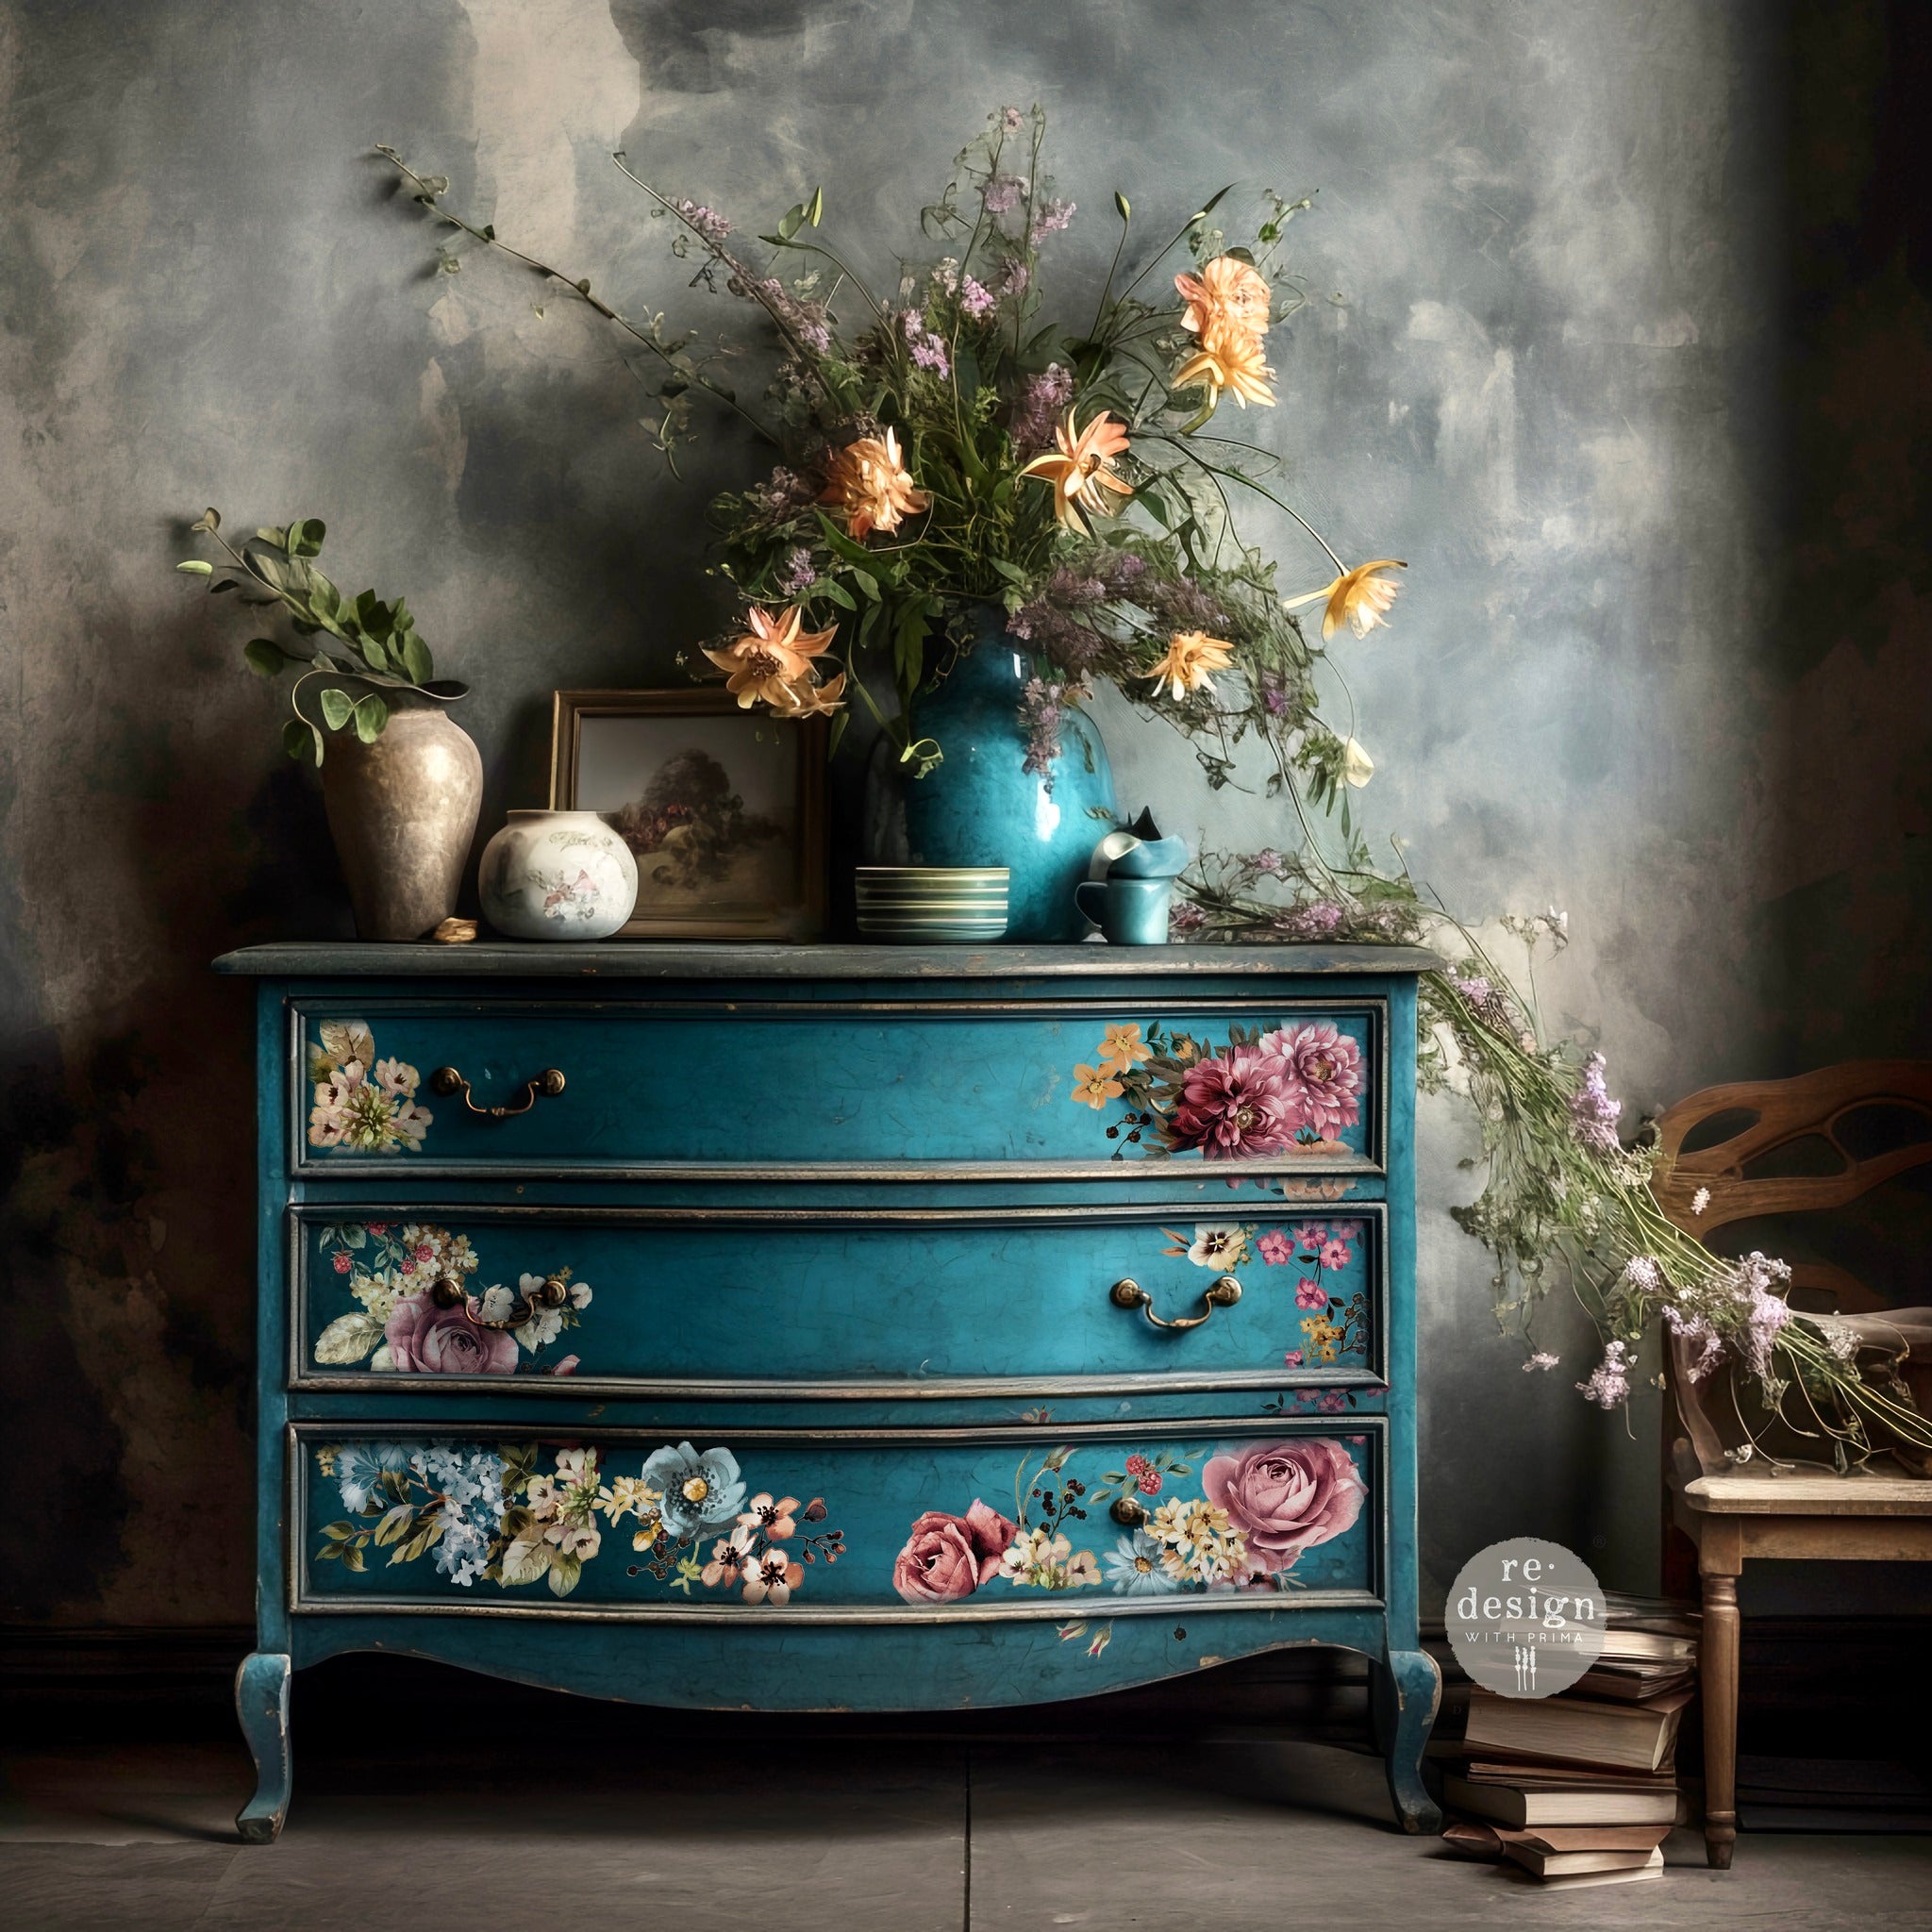 A vintage 3-drawer dresser is painted in rich teal and features ReDesign with Prima's Ruby Rose rub-on transfer on its drawers.